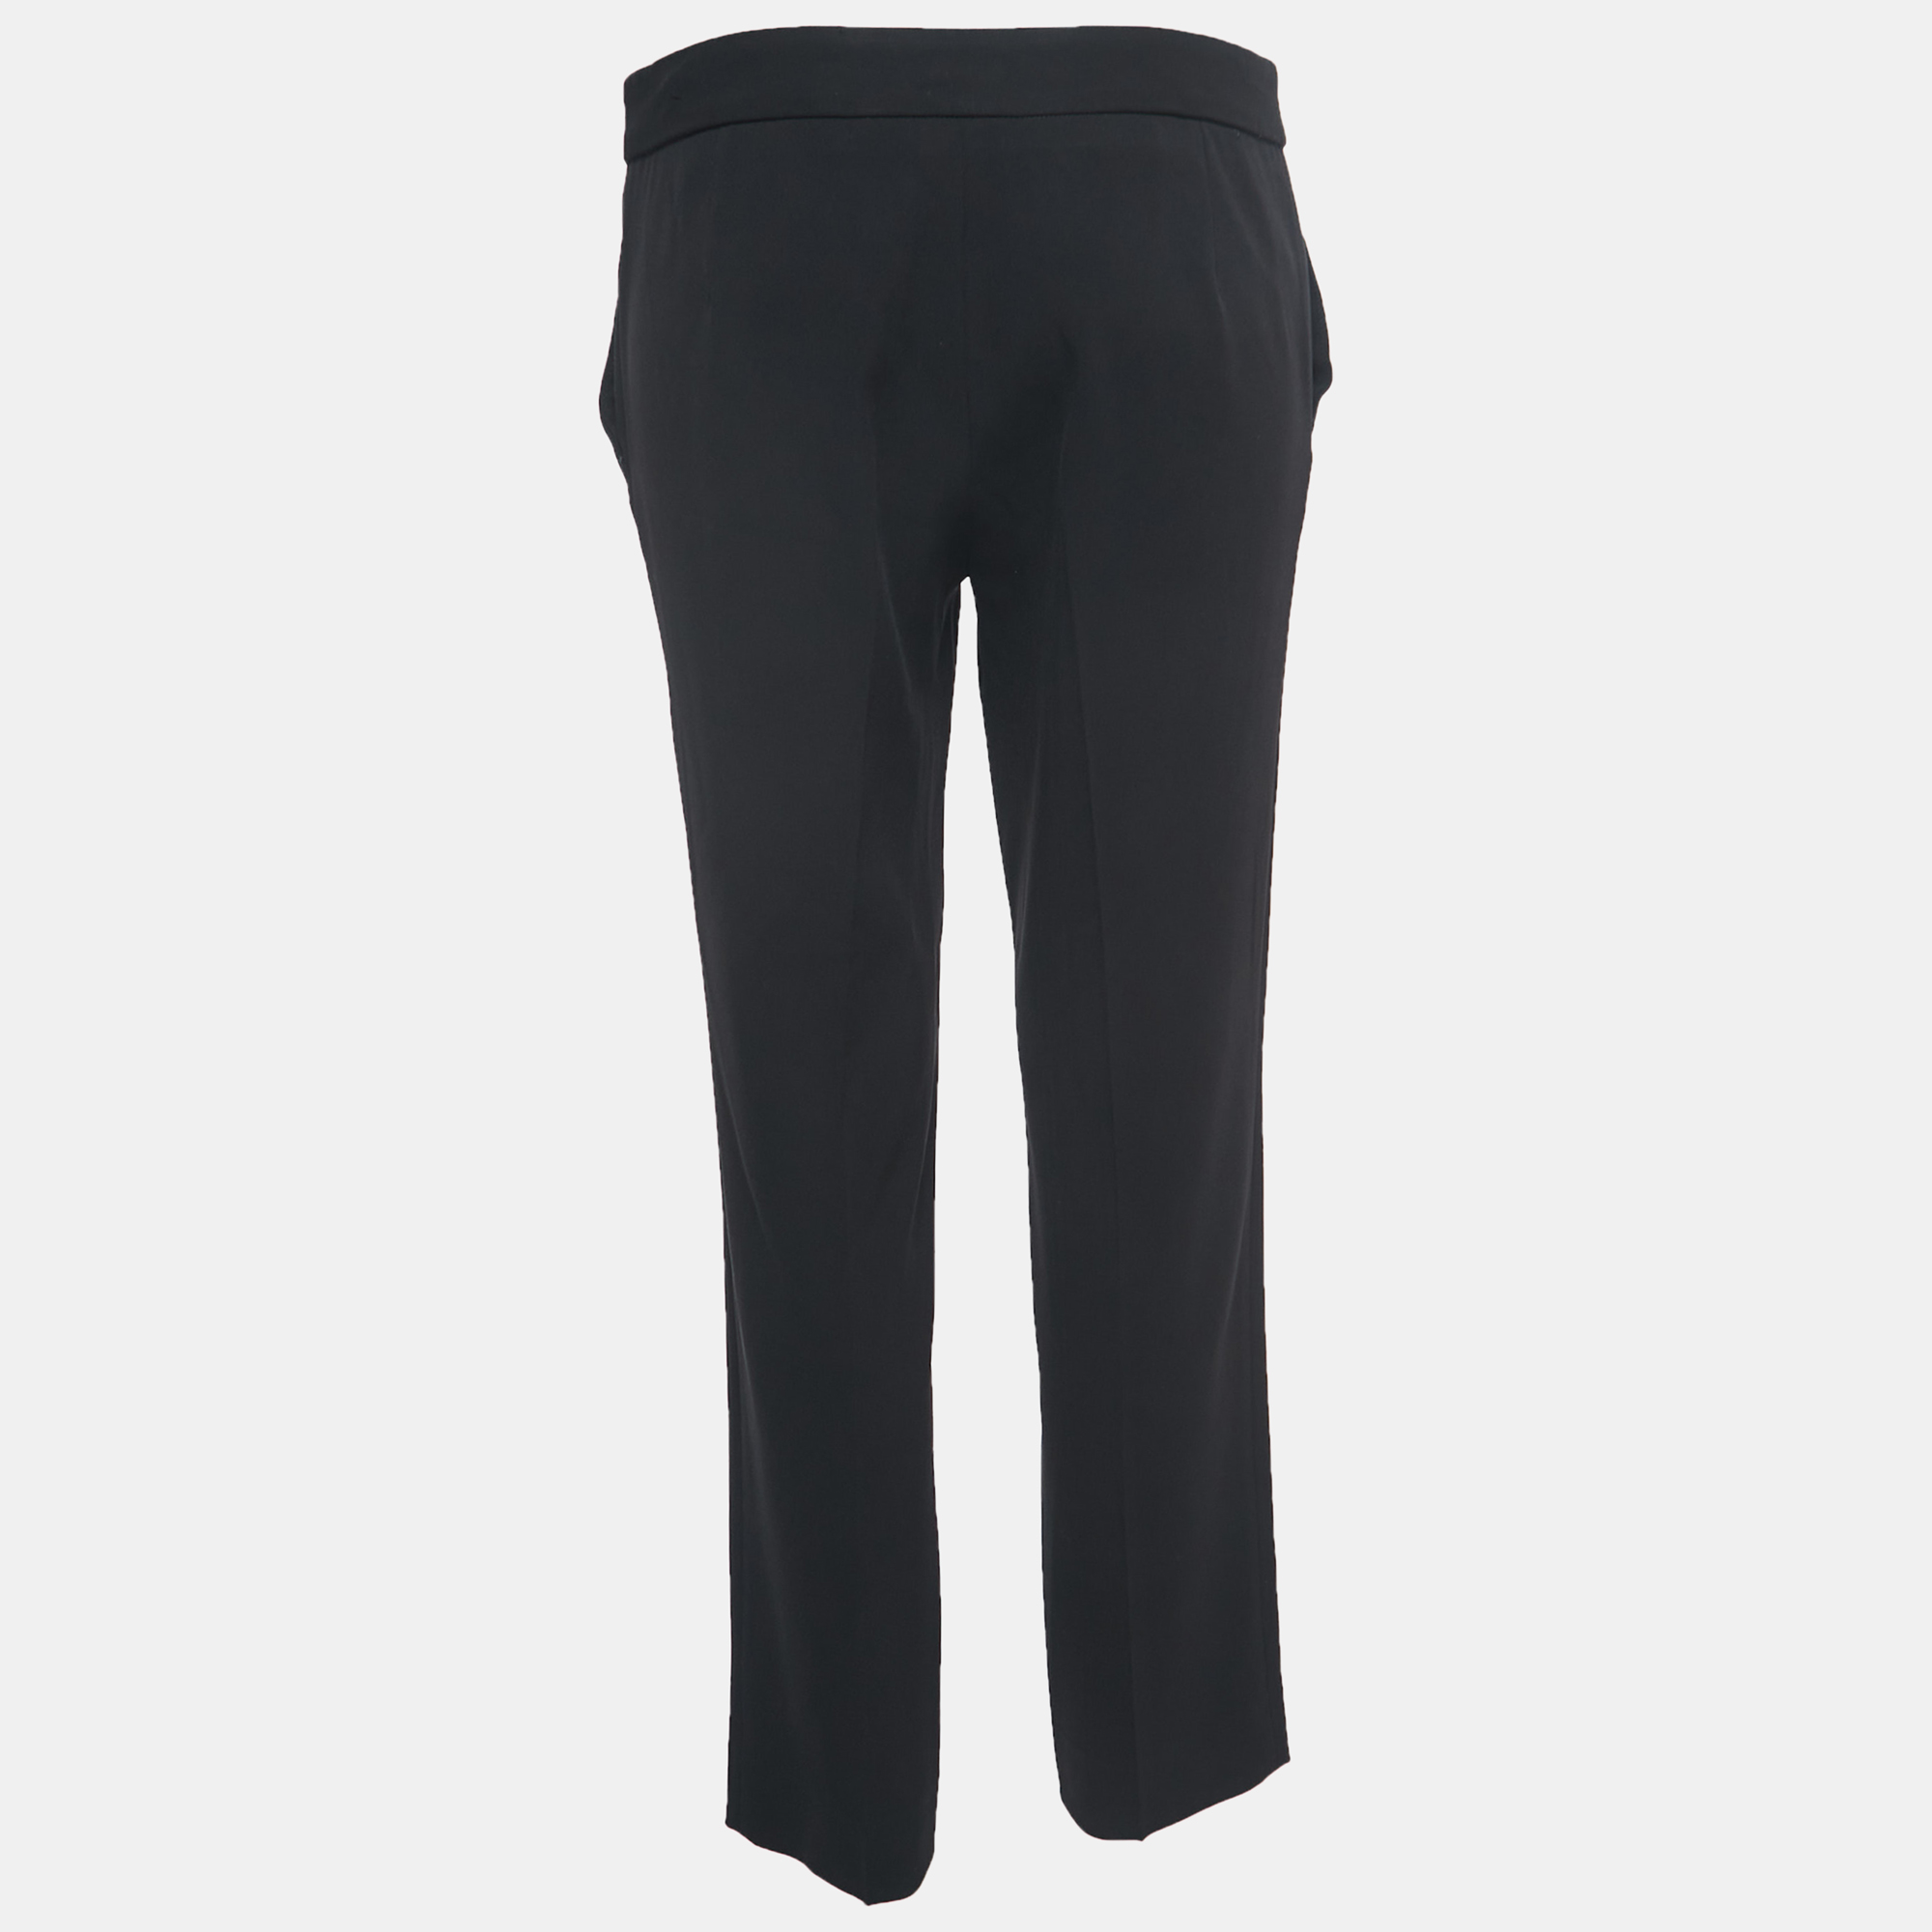 

Moschino Cheap and Chic Black Crepe Trousers